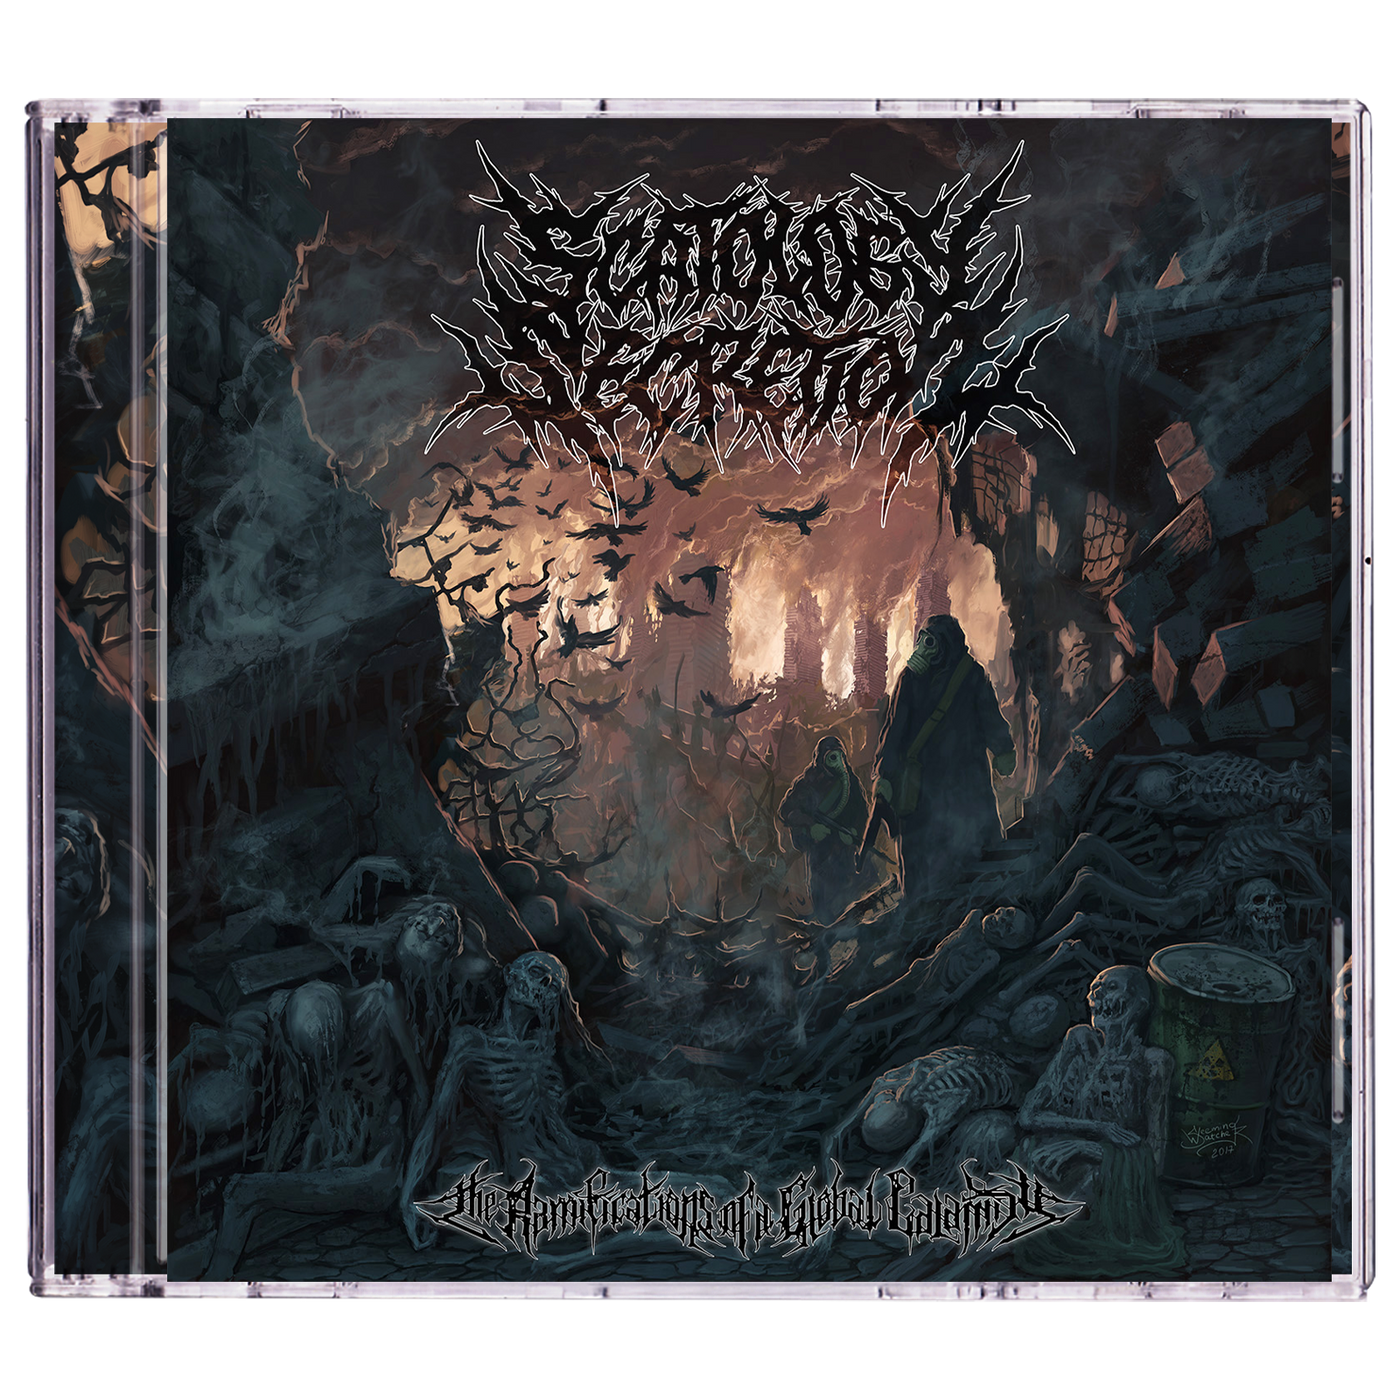 Scatology Secretion 'The Ramifications Of A Global Calamity' CD